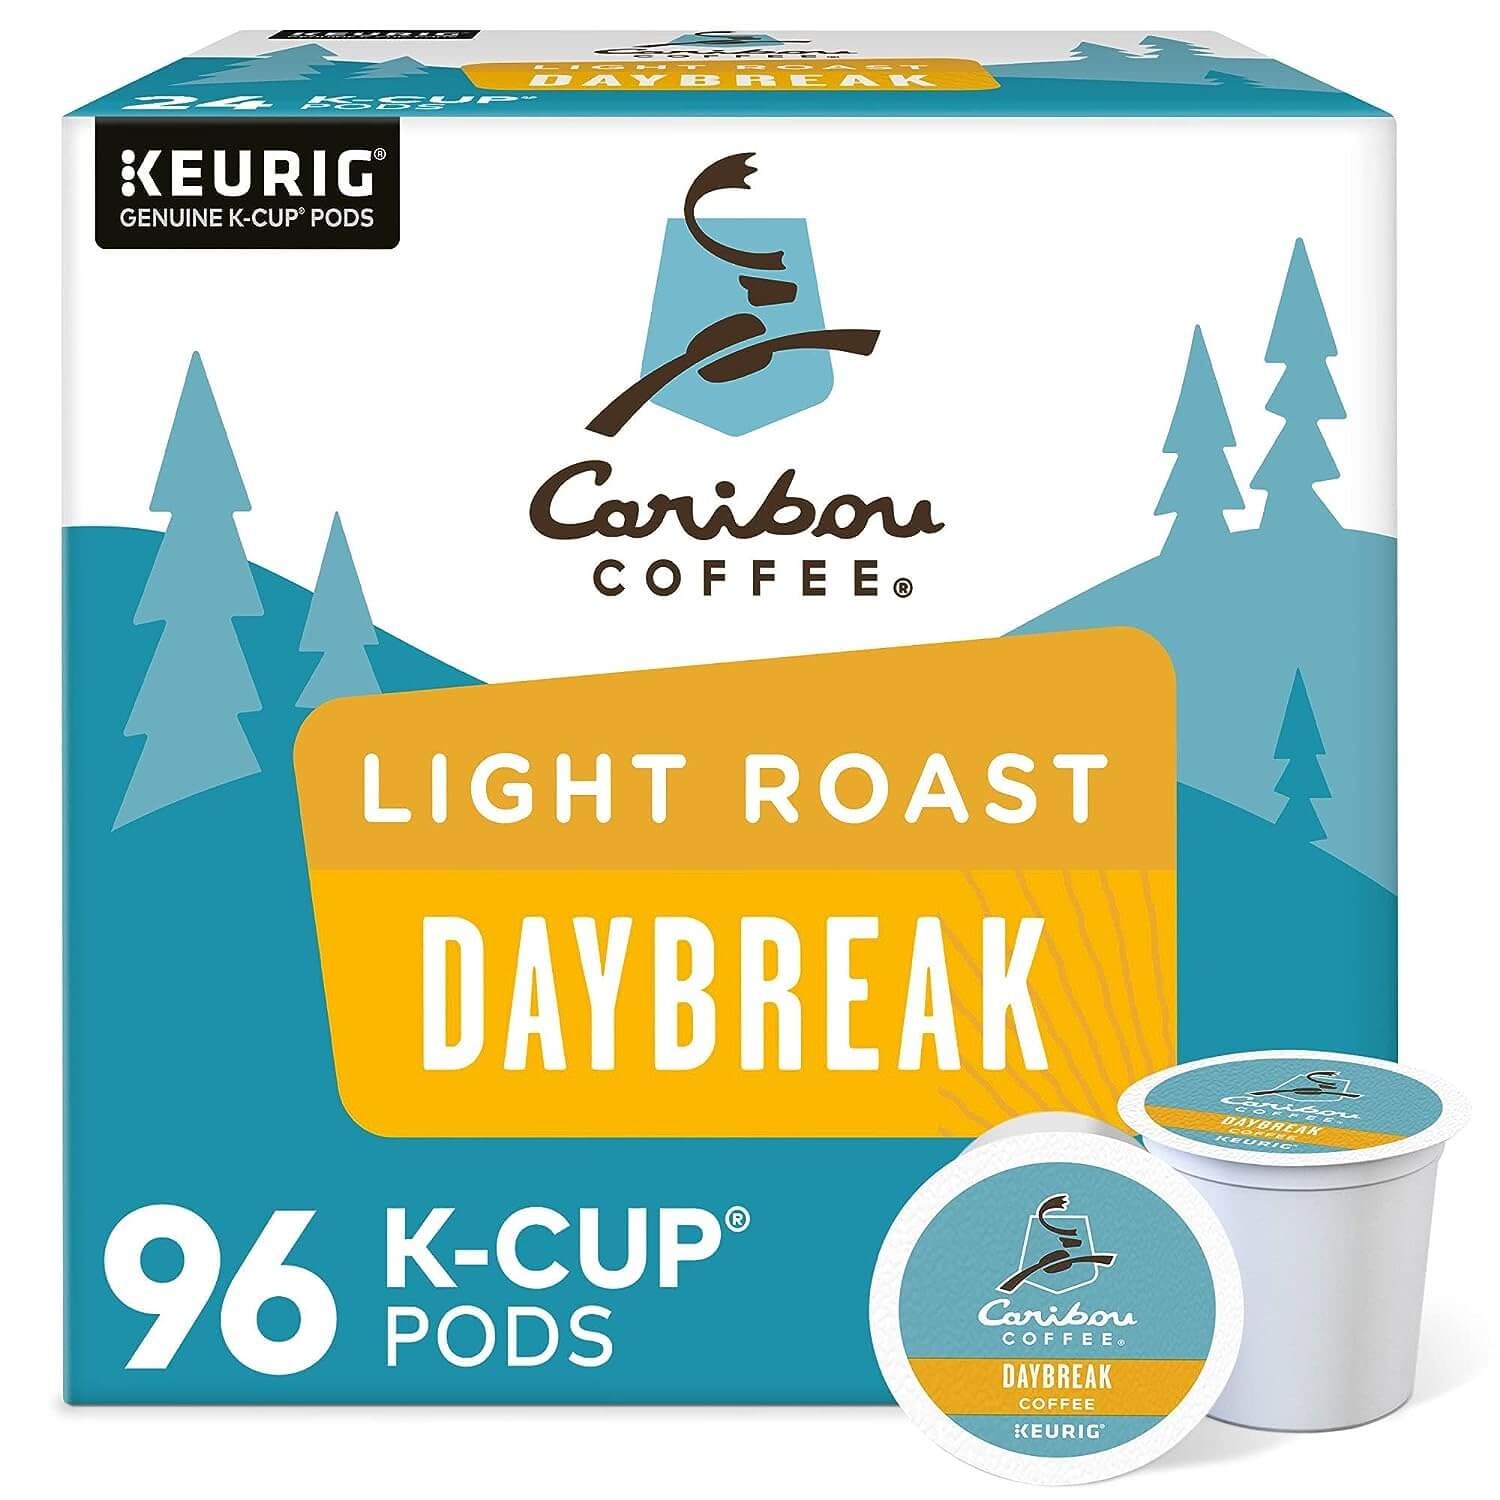 Caribou Coffee's Daybreak Morning Blend K-Cup